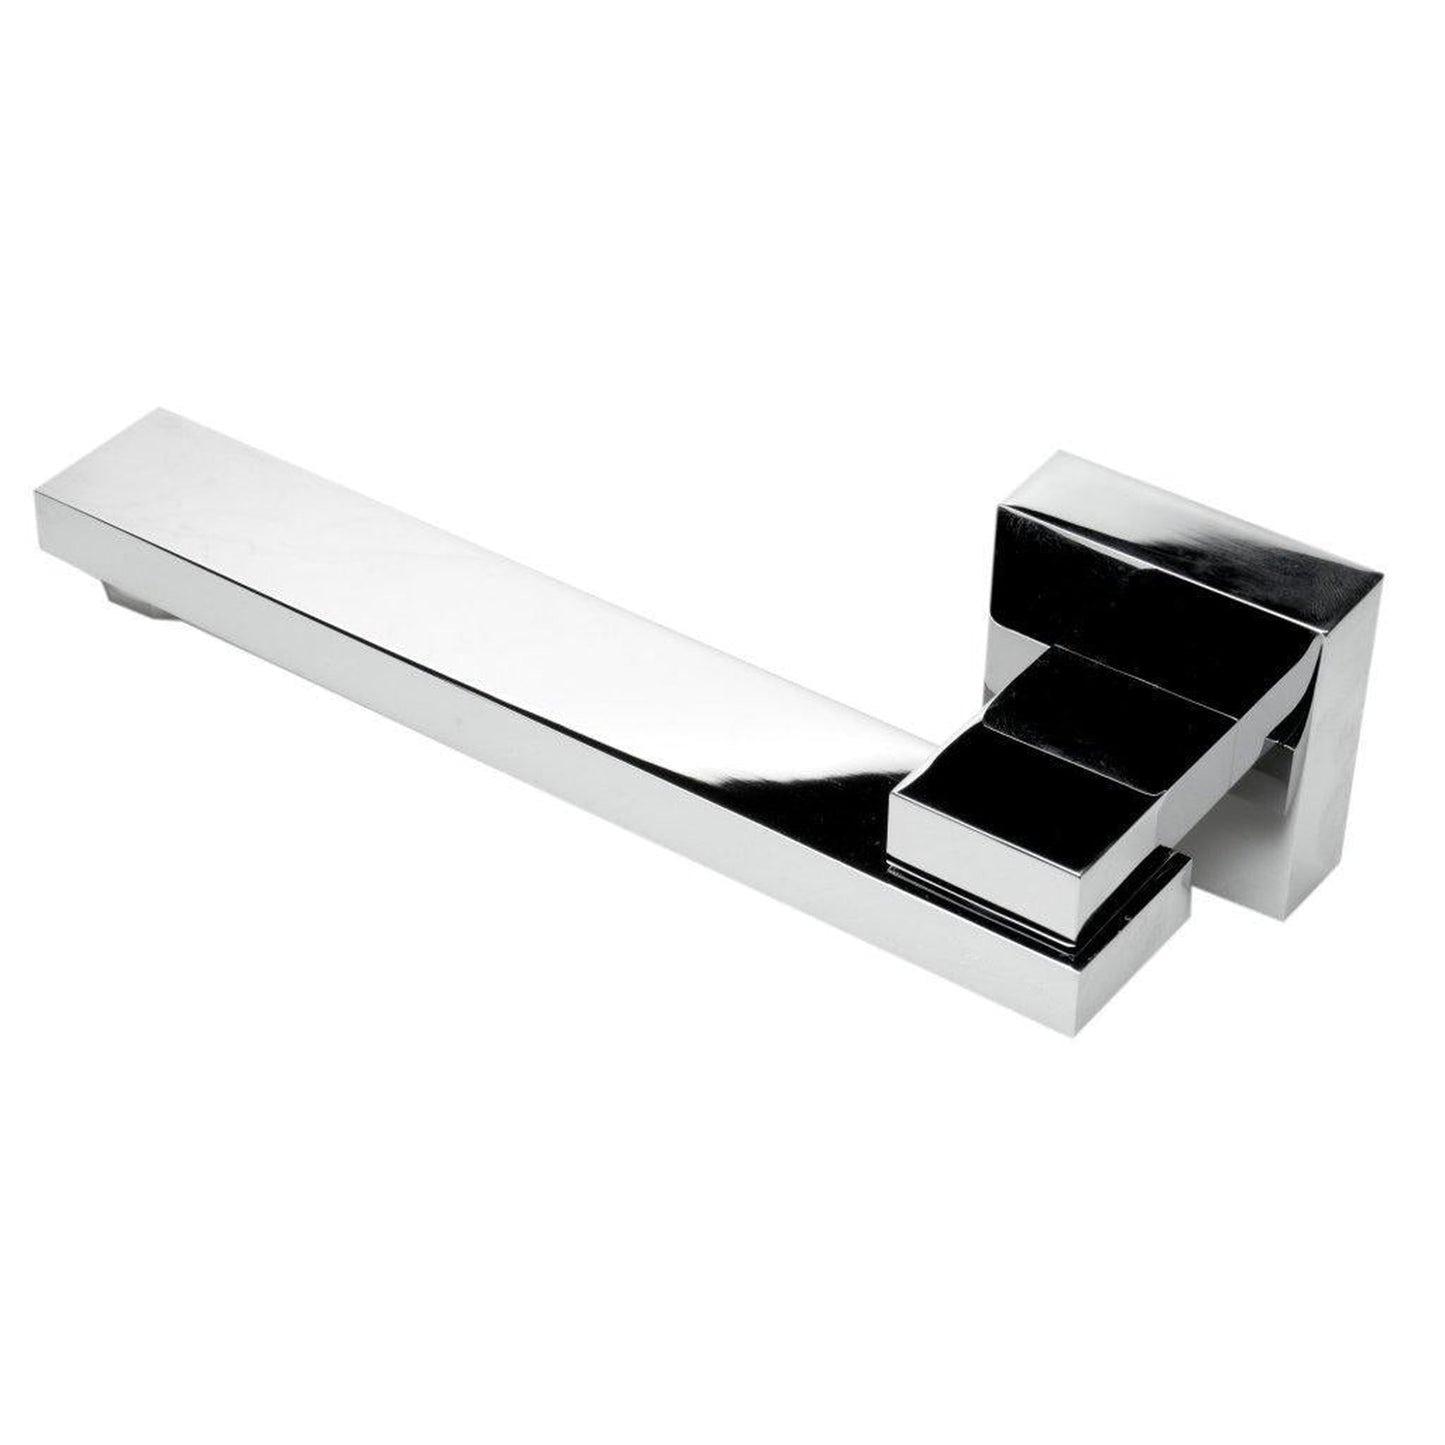 ALFI Brand AB7701-PC Polished Chrome Wall-Mounted Solid Brass Square Foldable Tub Spout